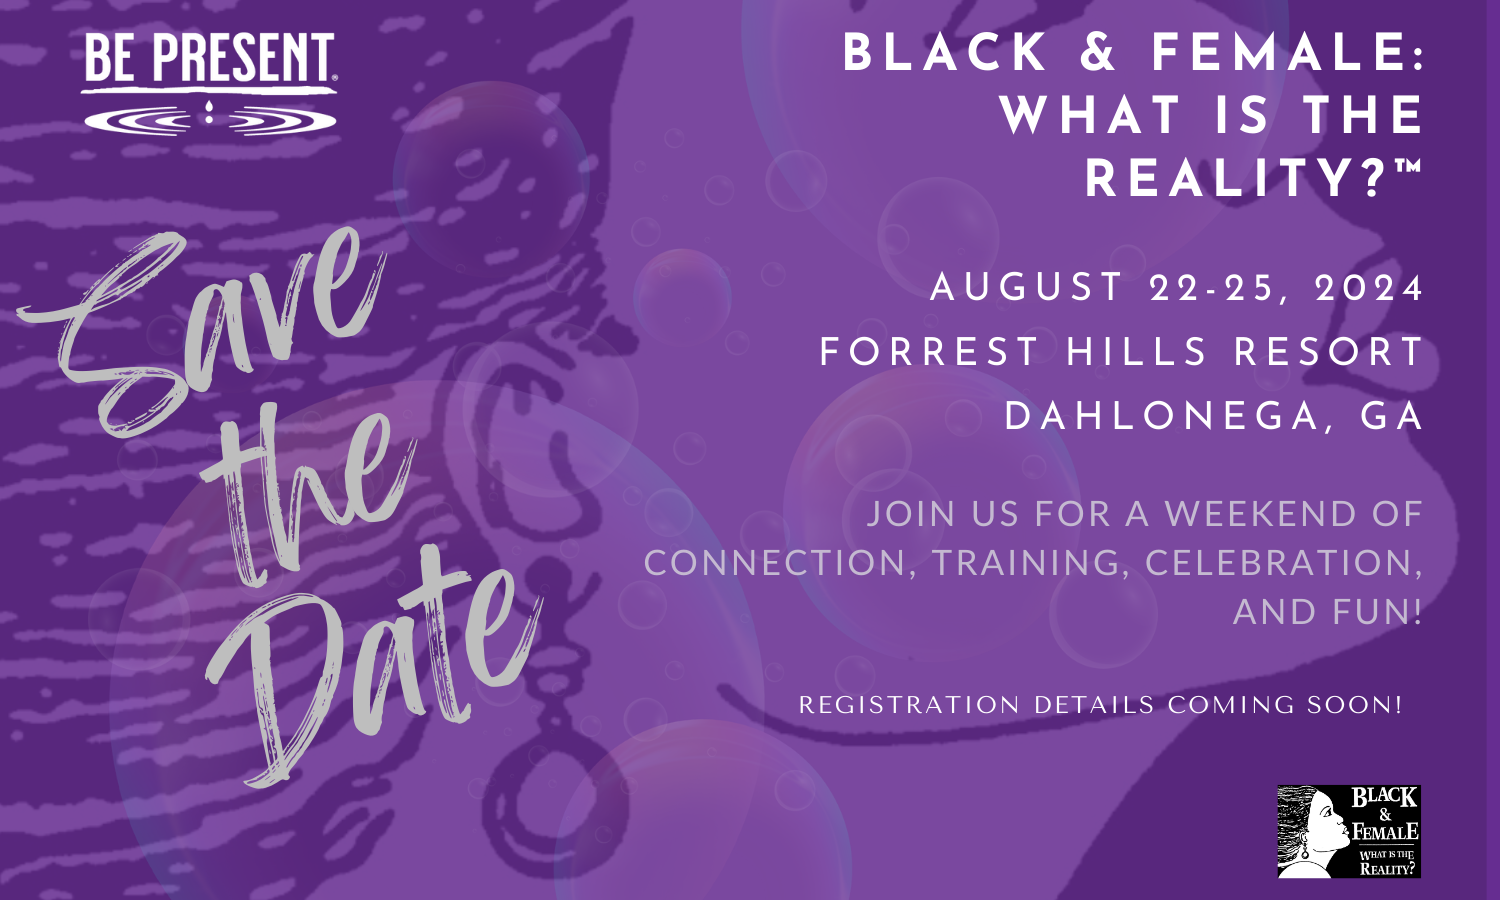 Black & Female: What is the Reality?™  A Weekend Celebration and Training Retreat